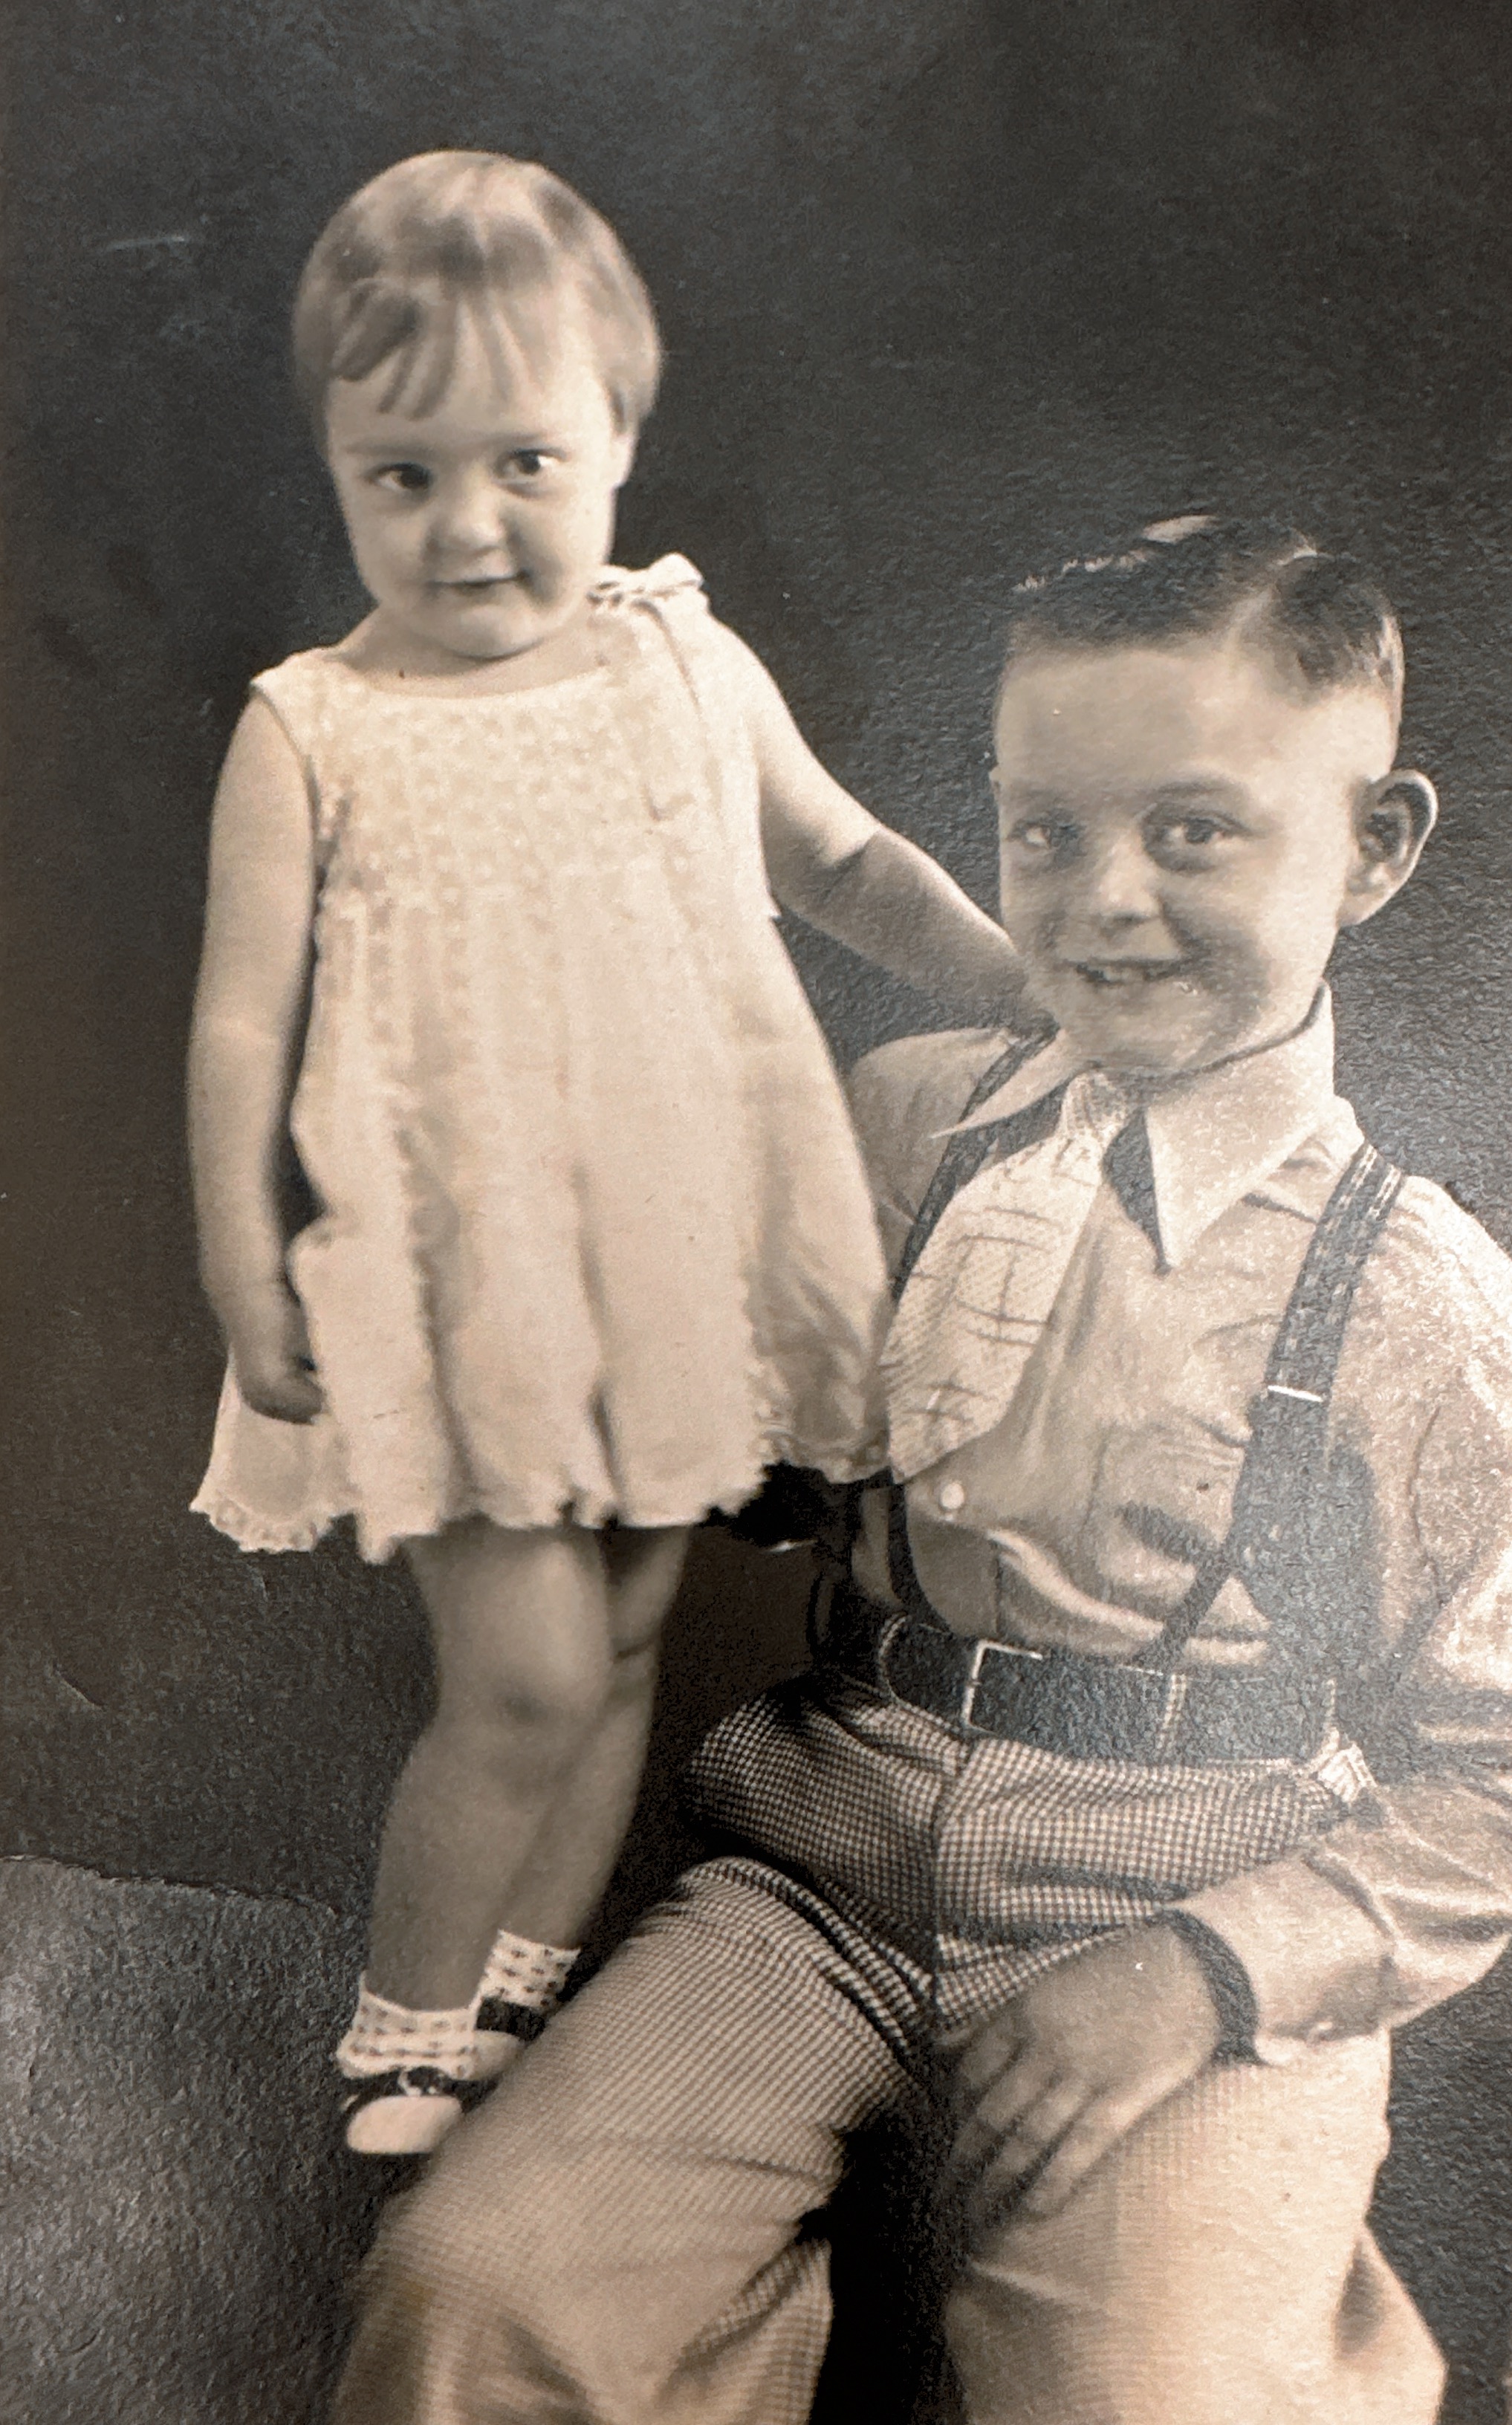 Cleo Carmen Wilcoxson approximately aged 2 and Waid Orion Wilcoxson aged 9